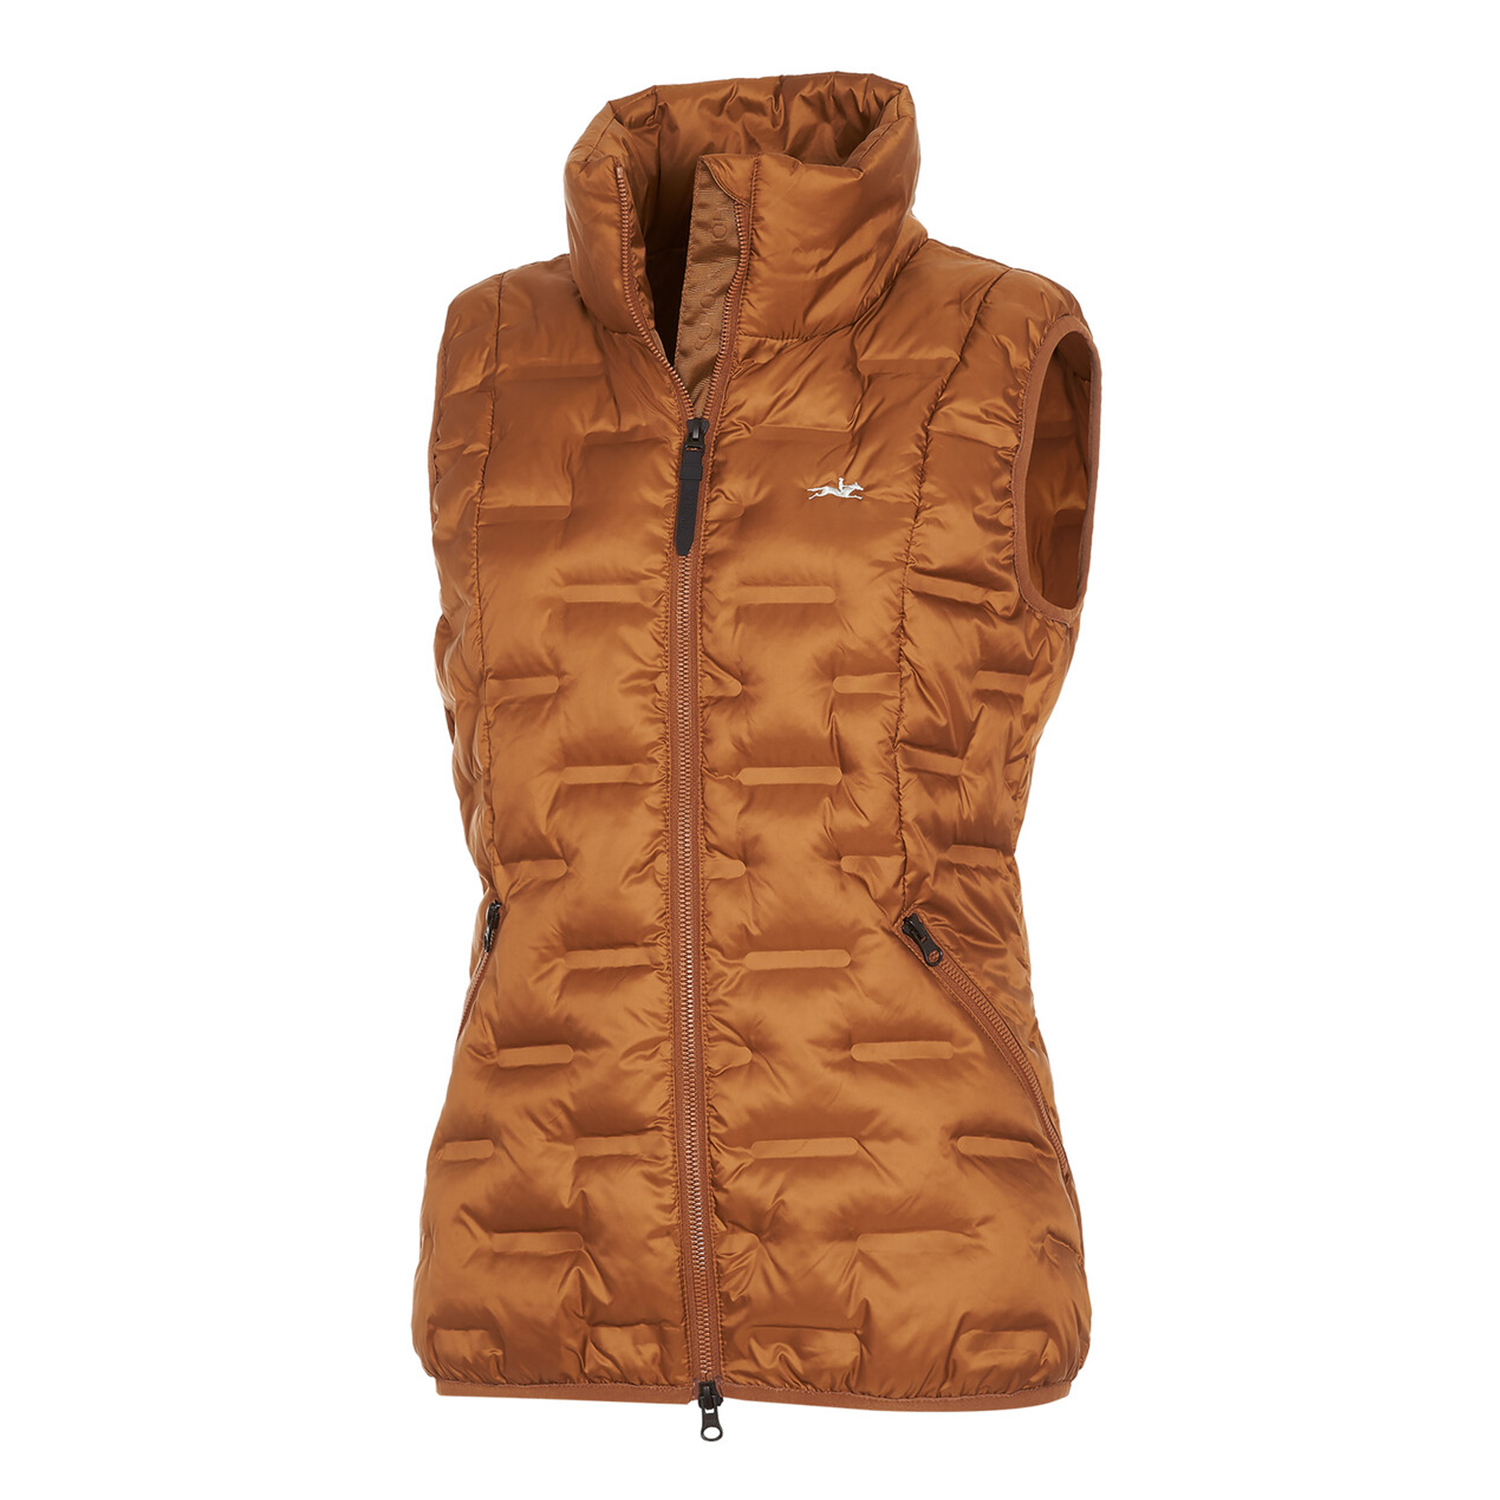 Favorite Rose Hot Get Ladies Cognac Waistcoat, Quilted Style Schockemohle Sale Online Your